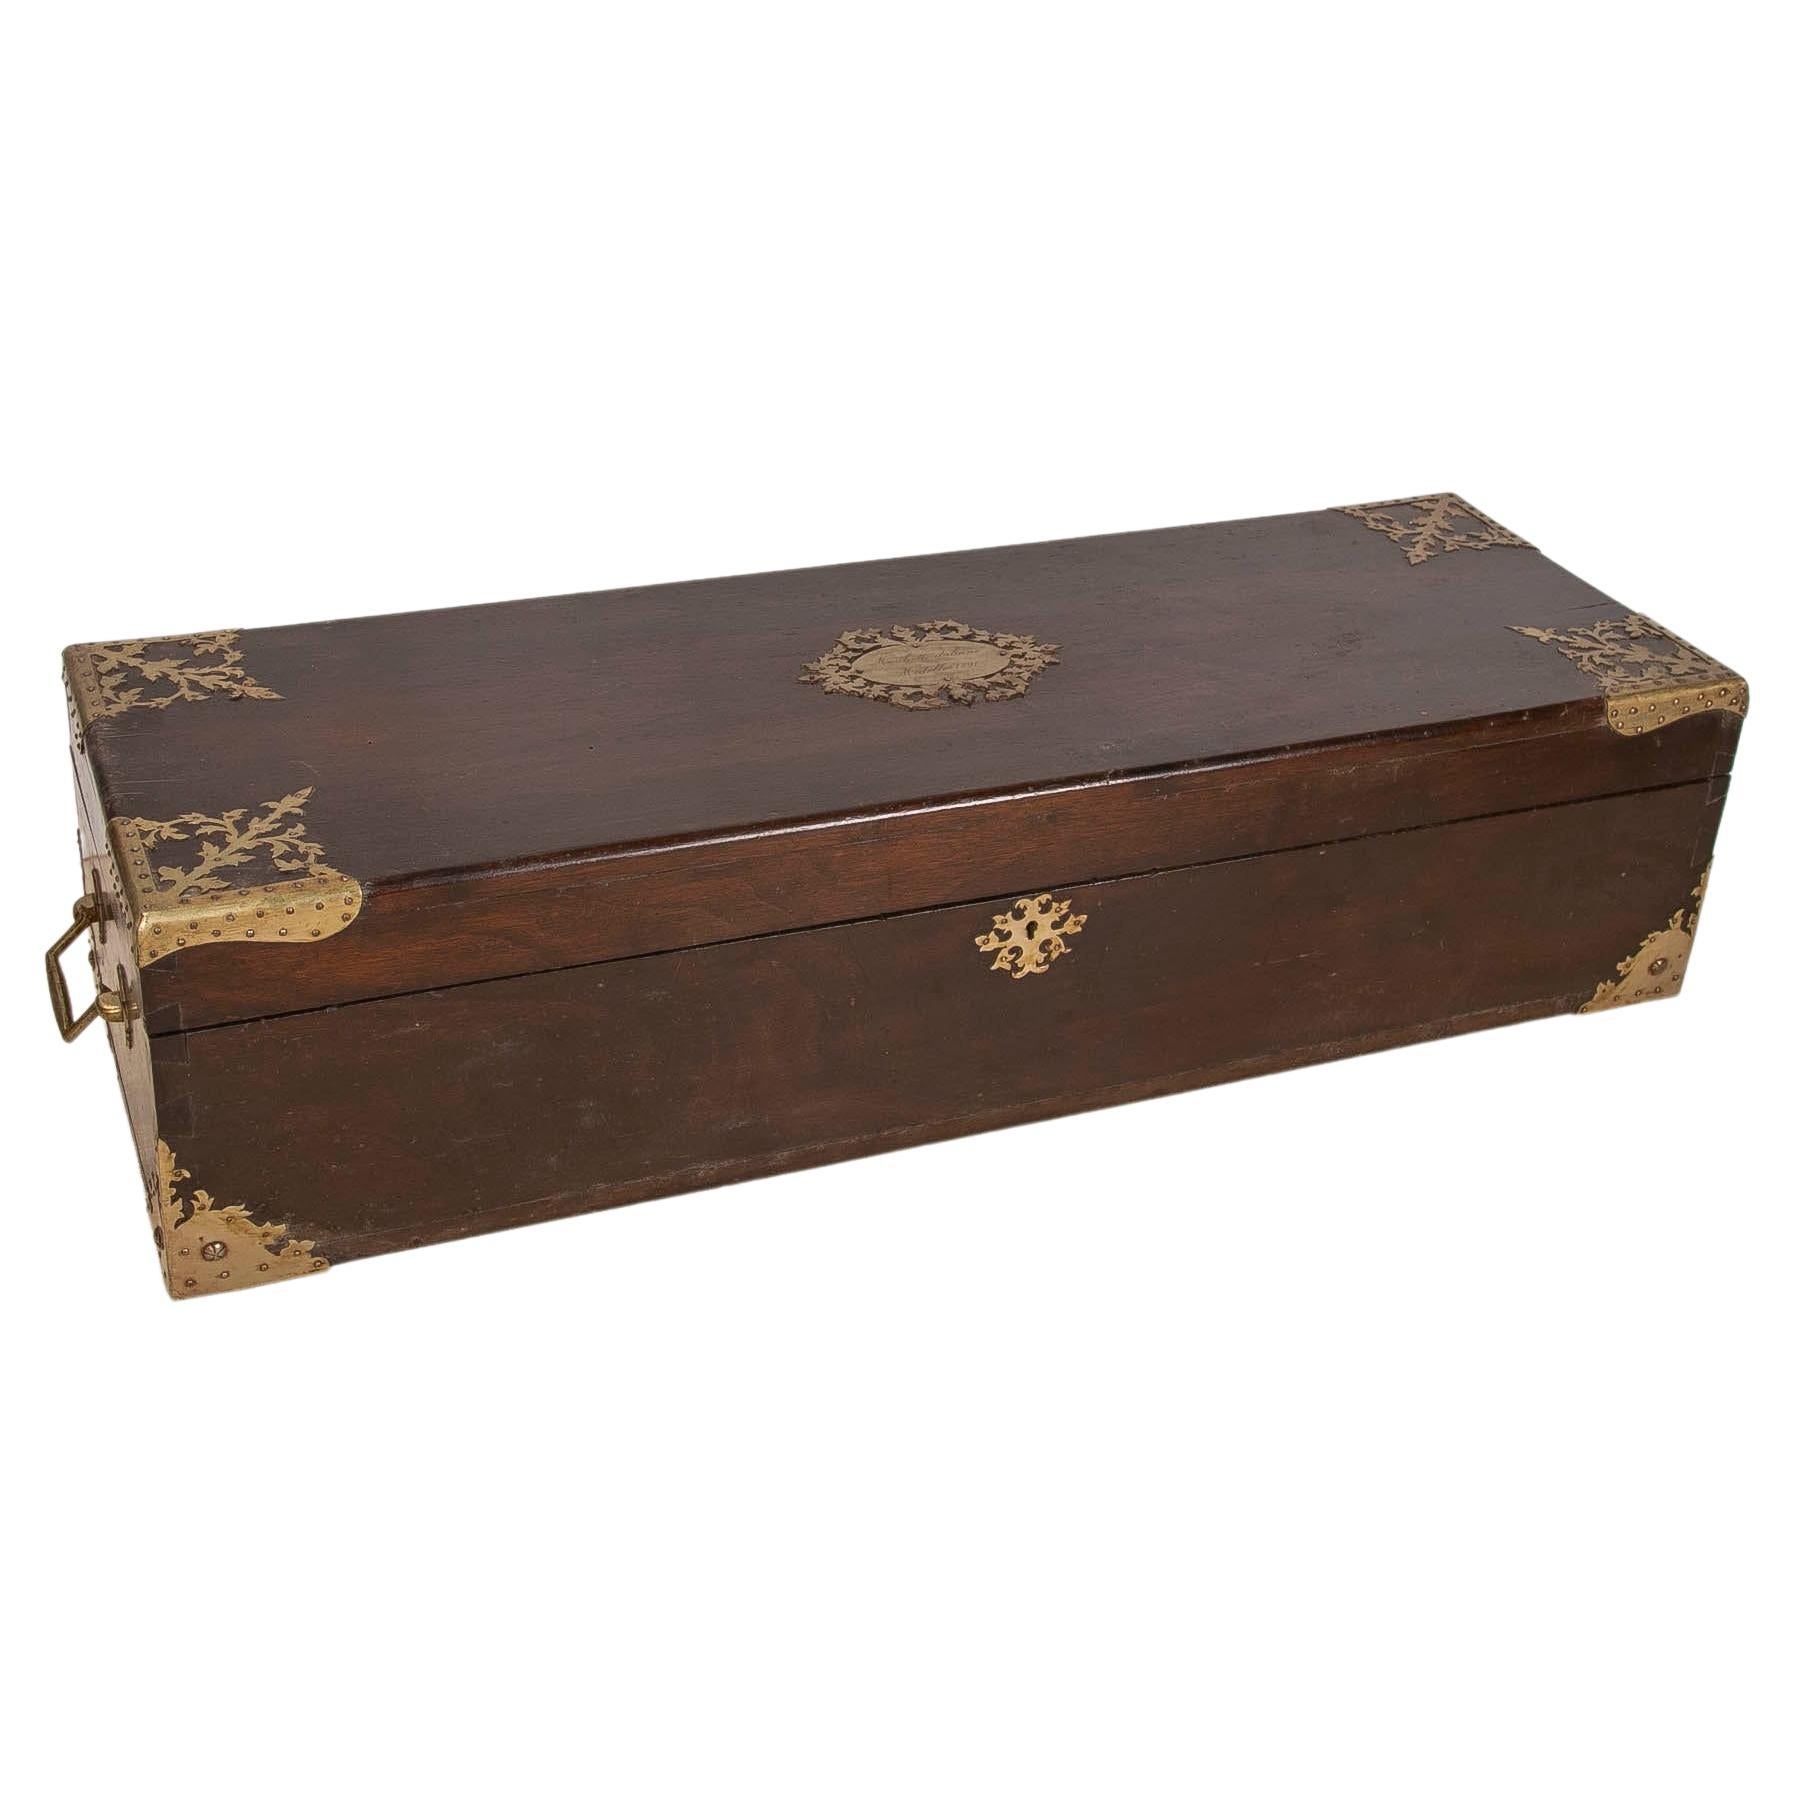 Italian Rectangular Wooden Box with Metal Decorations and Inscription dated 1891 For Sale